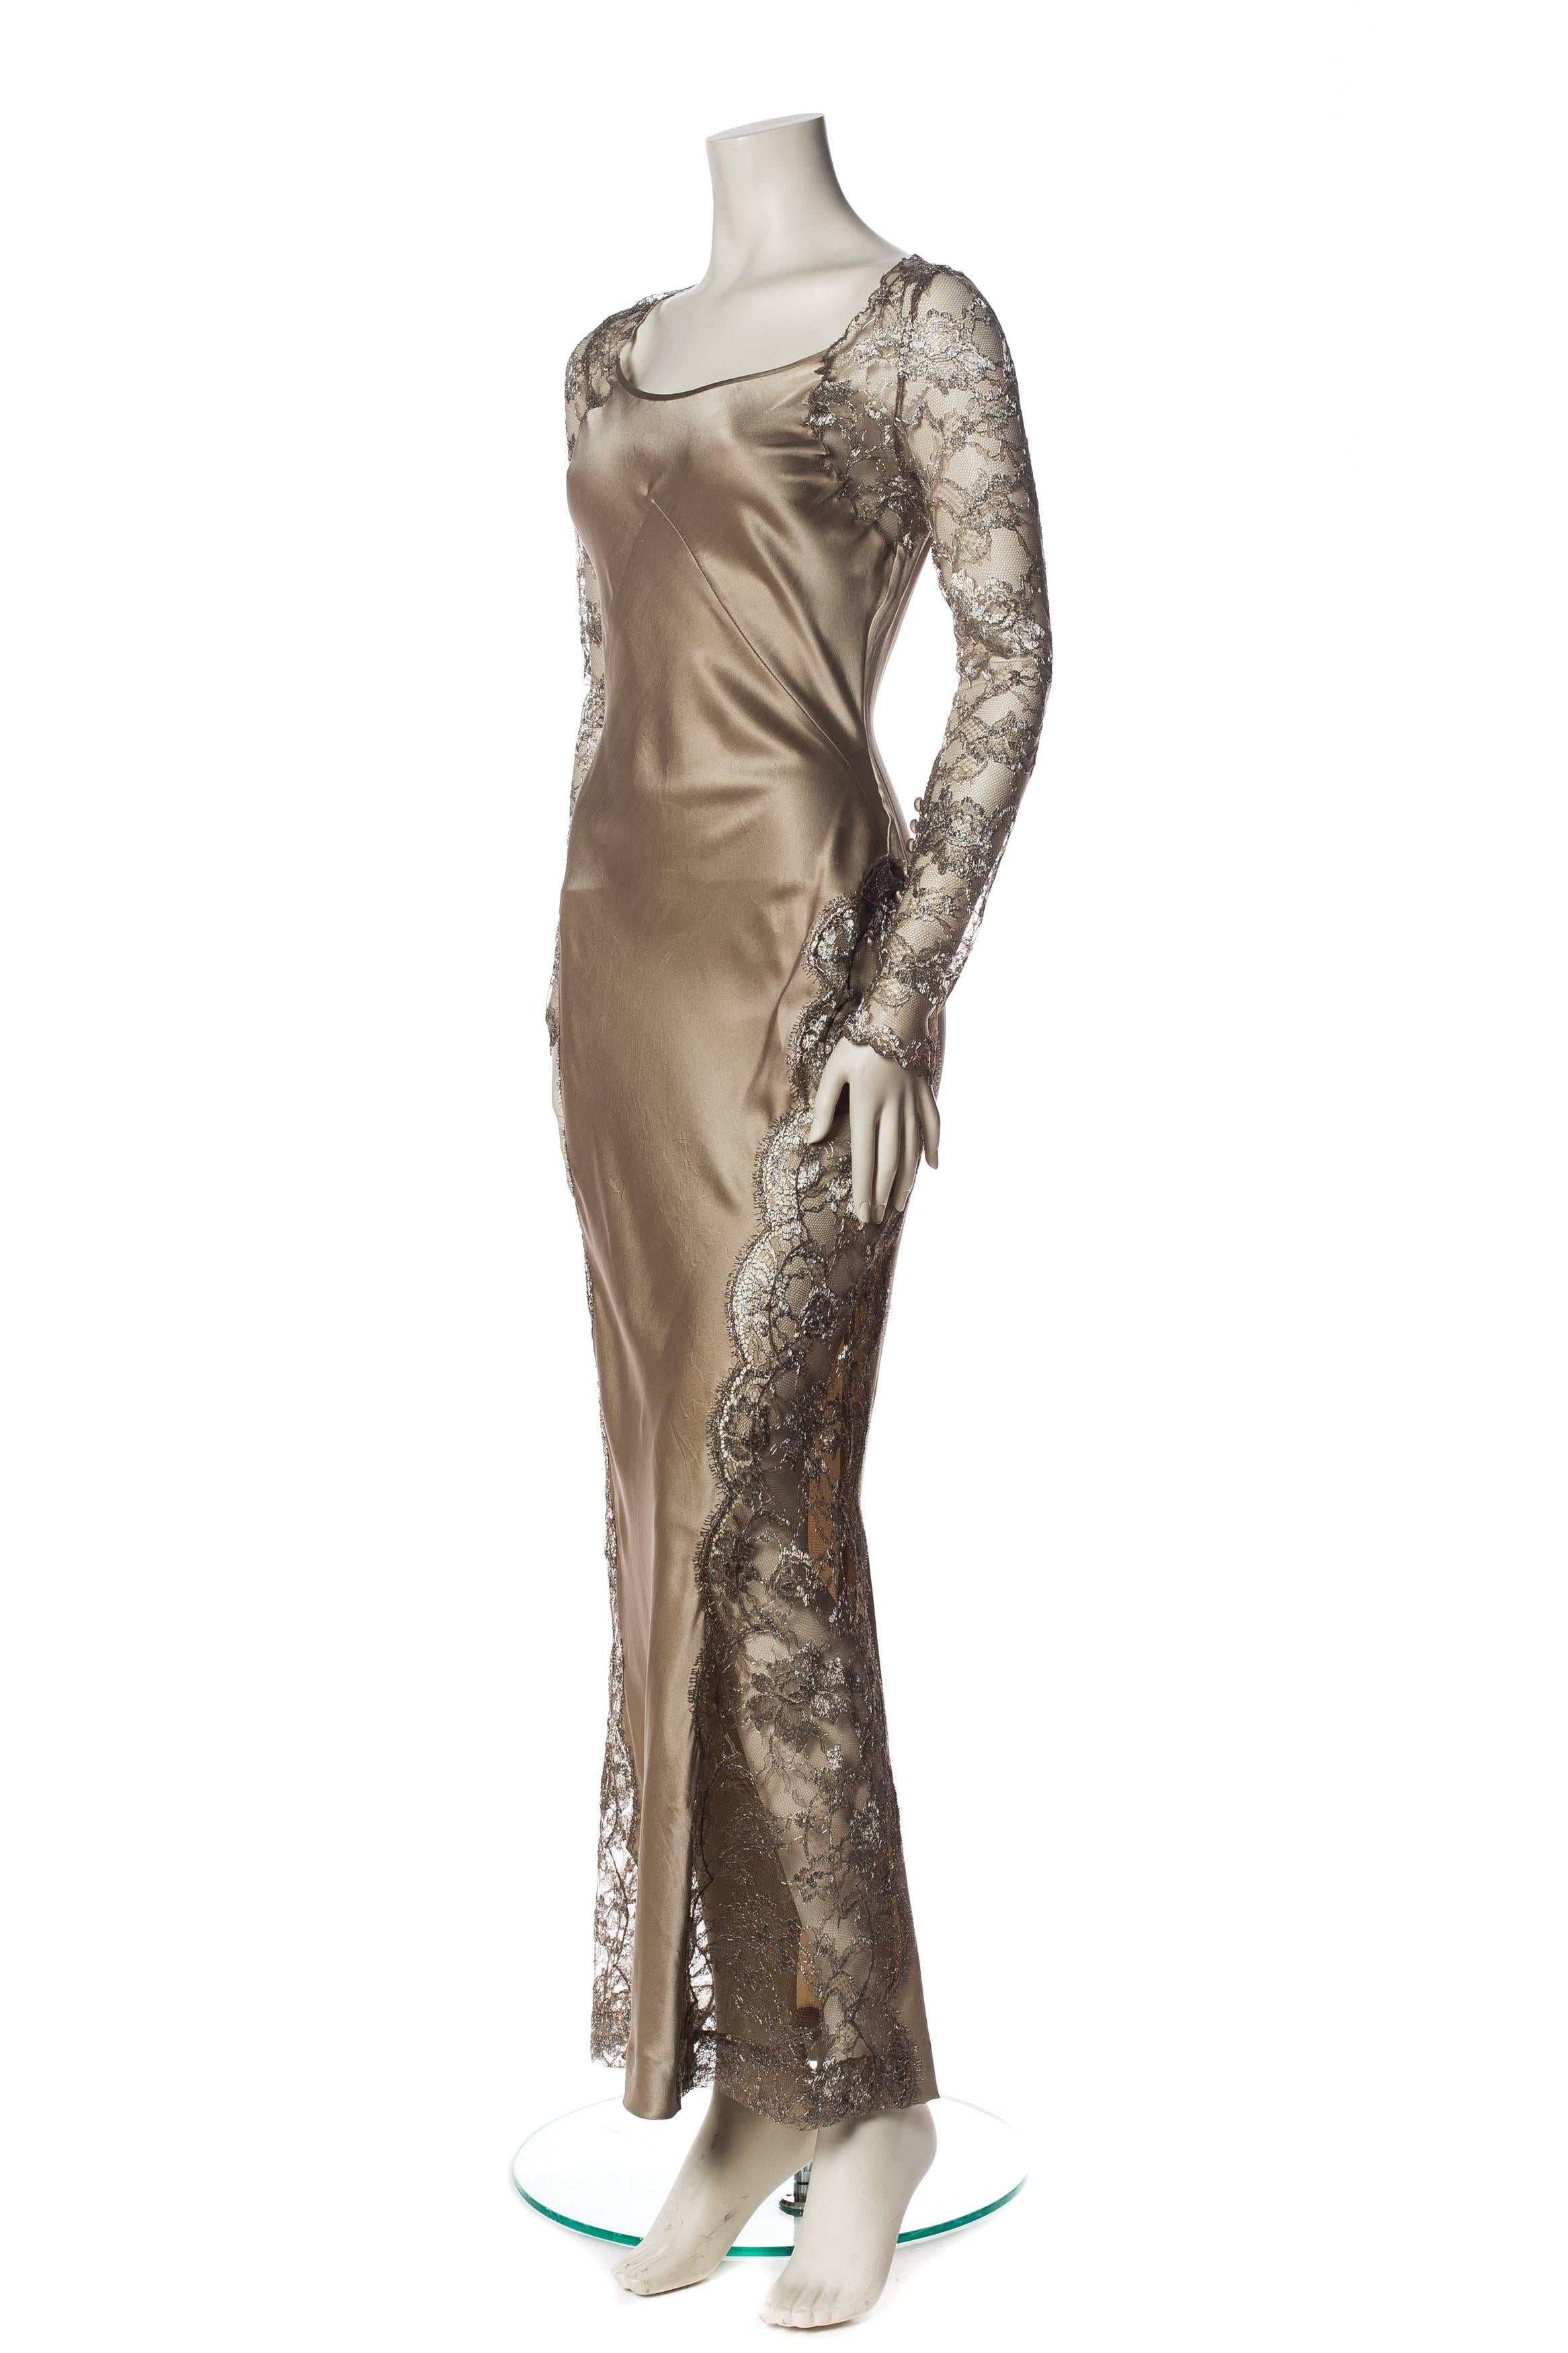 Richard Tyler Washed Silk And Lace Bias Cut Gown Dress In Excellent Condition For Sale In New York, NY